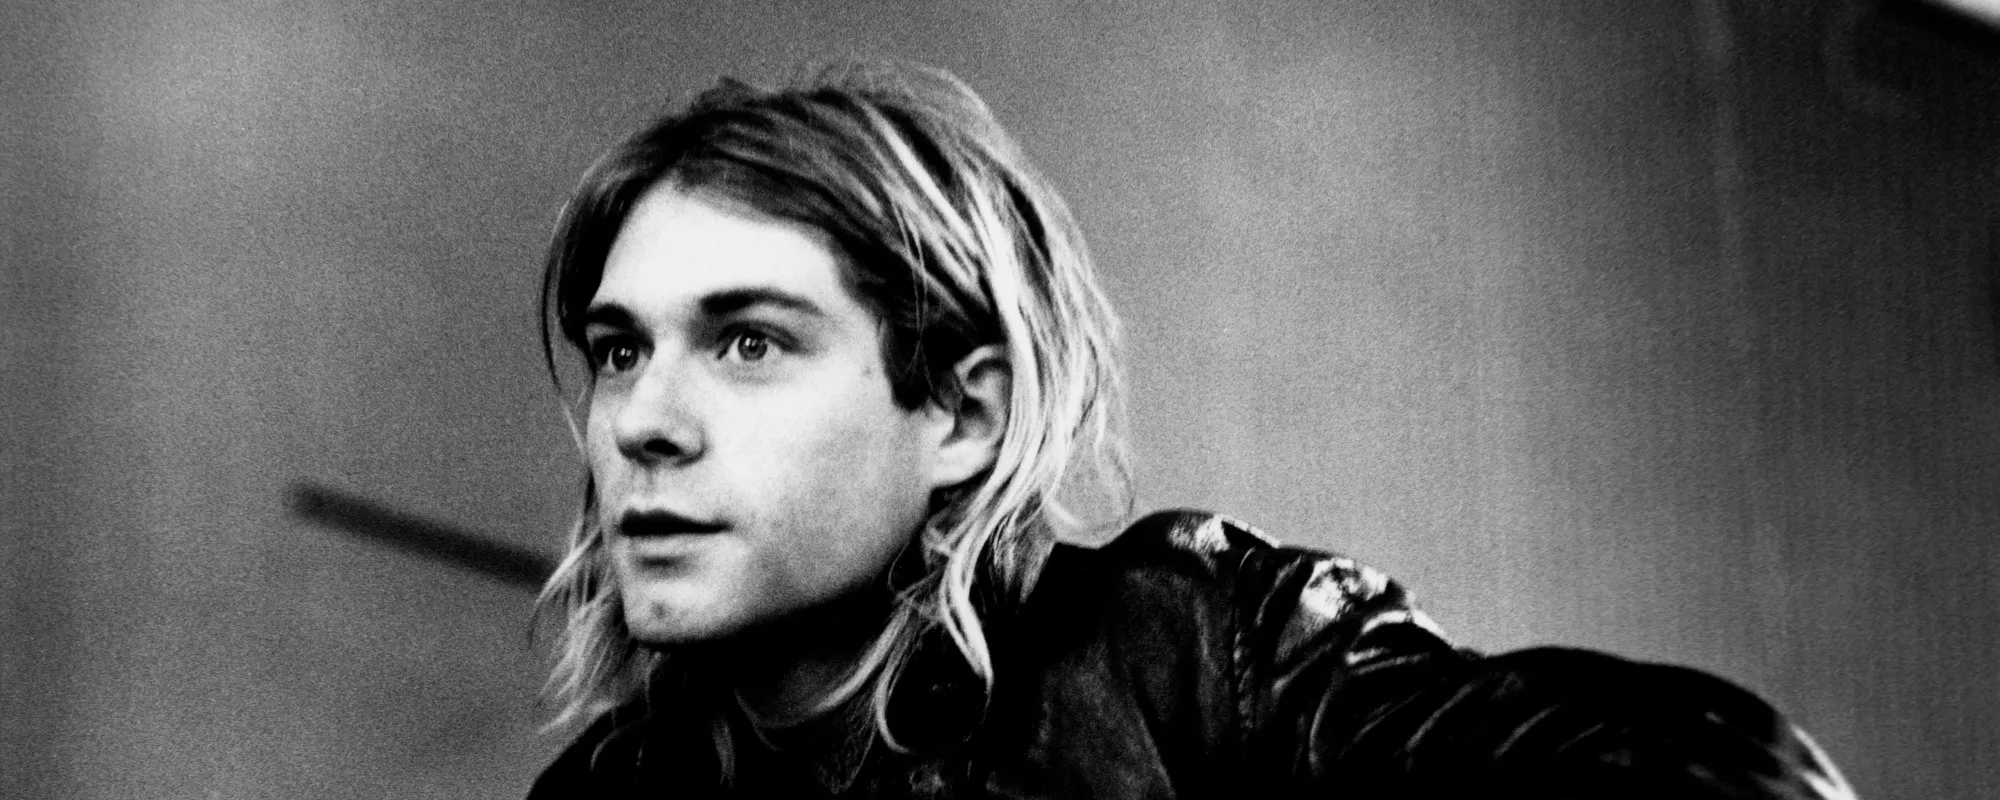 All Songs on Nirvana’s ‘Nevermind’ Ranked